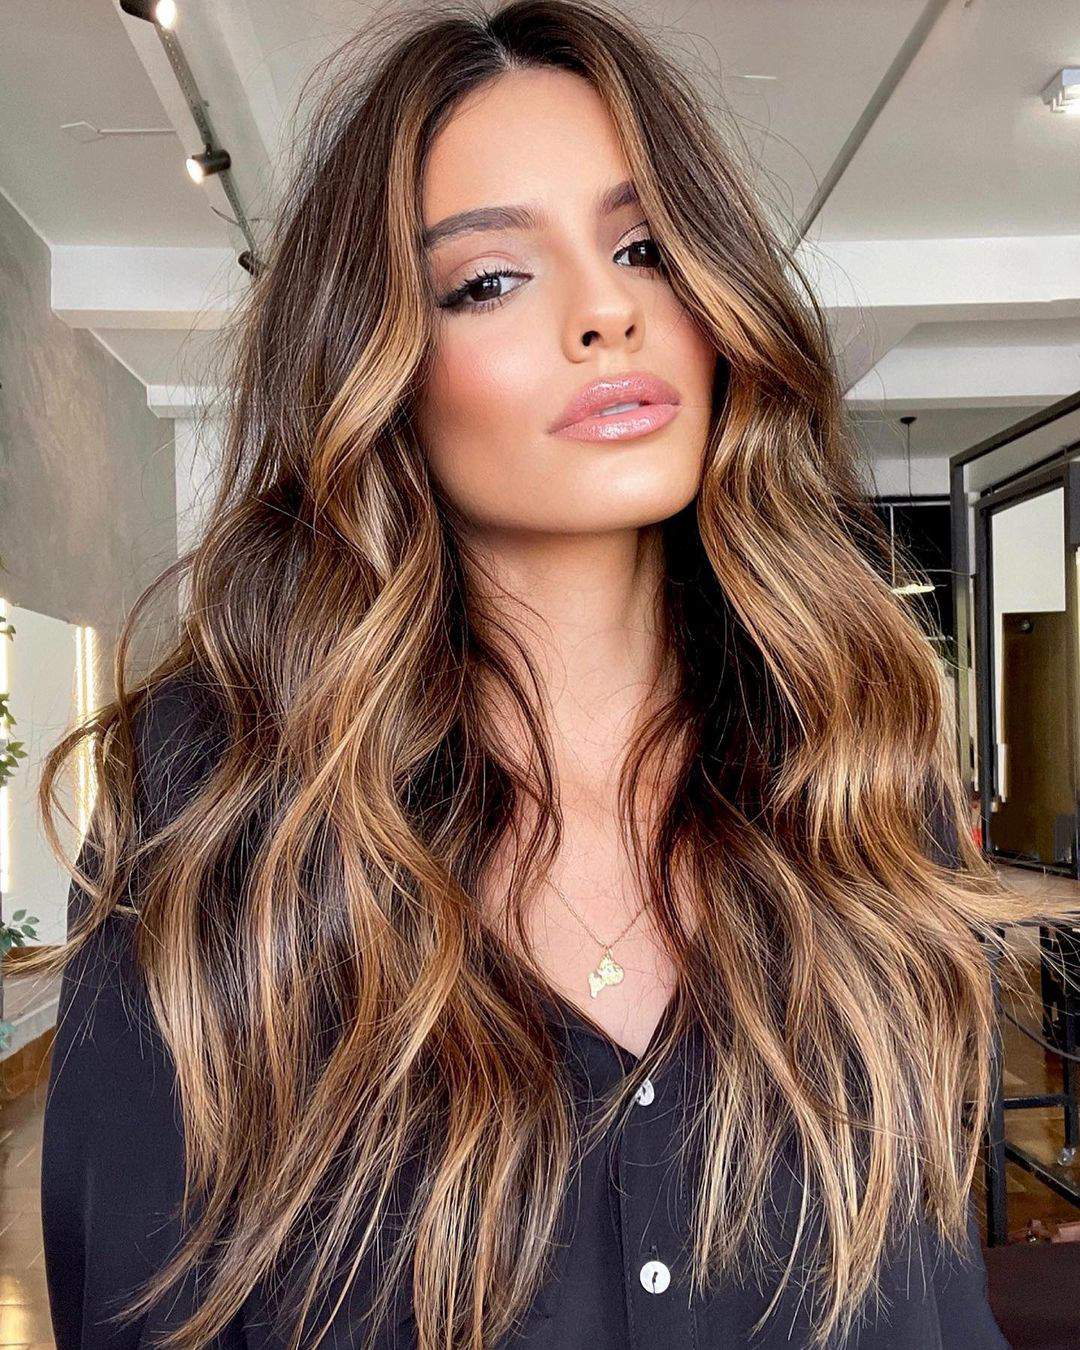 40 Greatest Long Hairstyles For Women With Long Hair In 2021 images 33